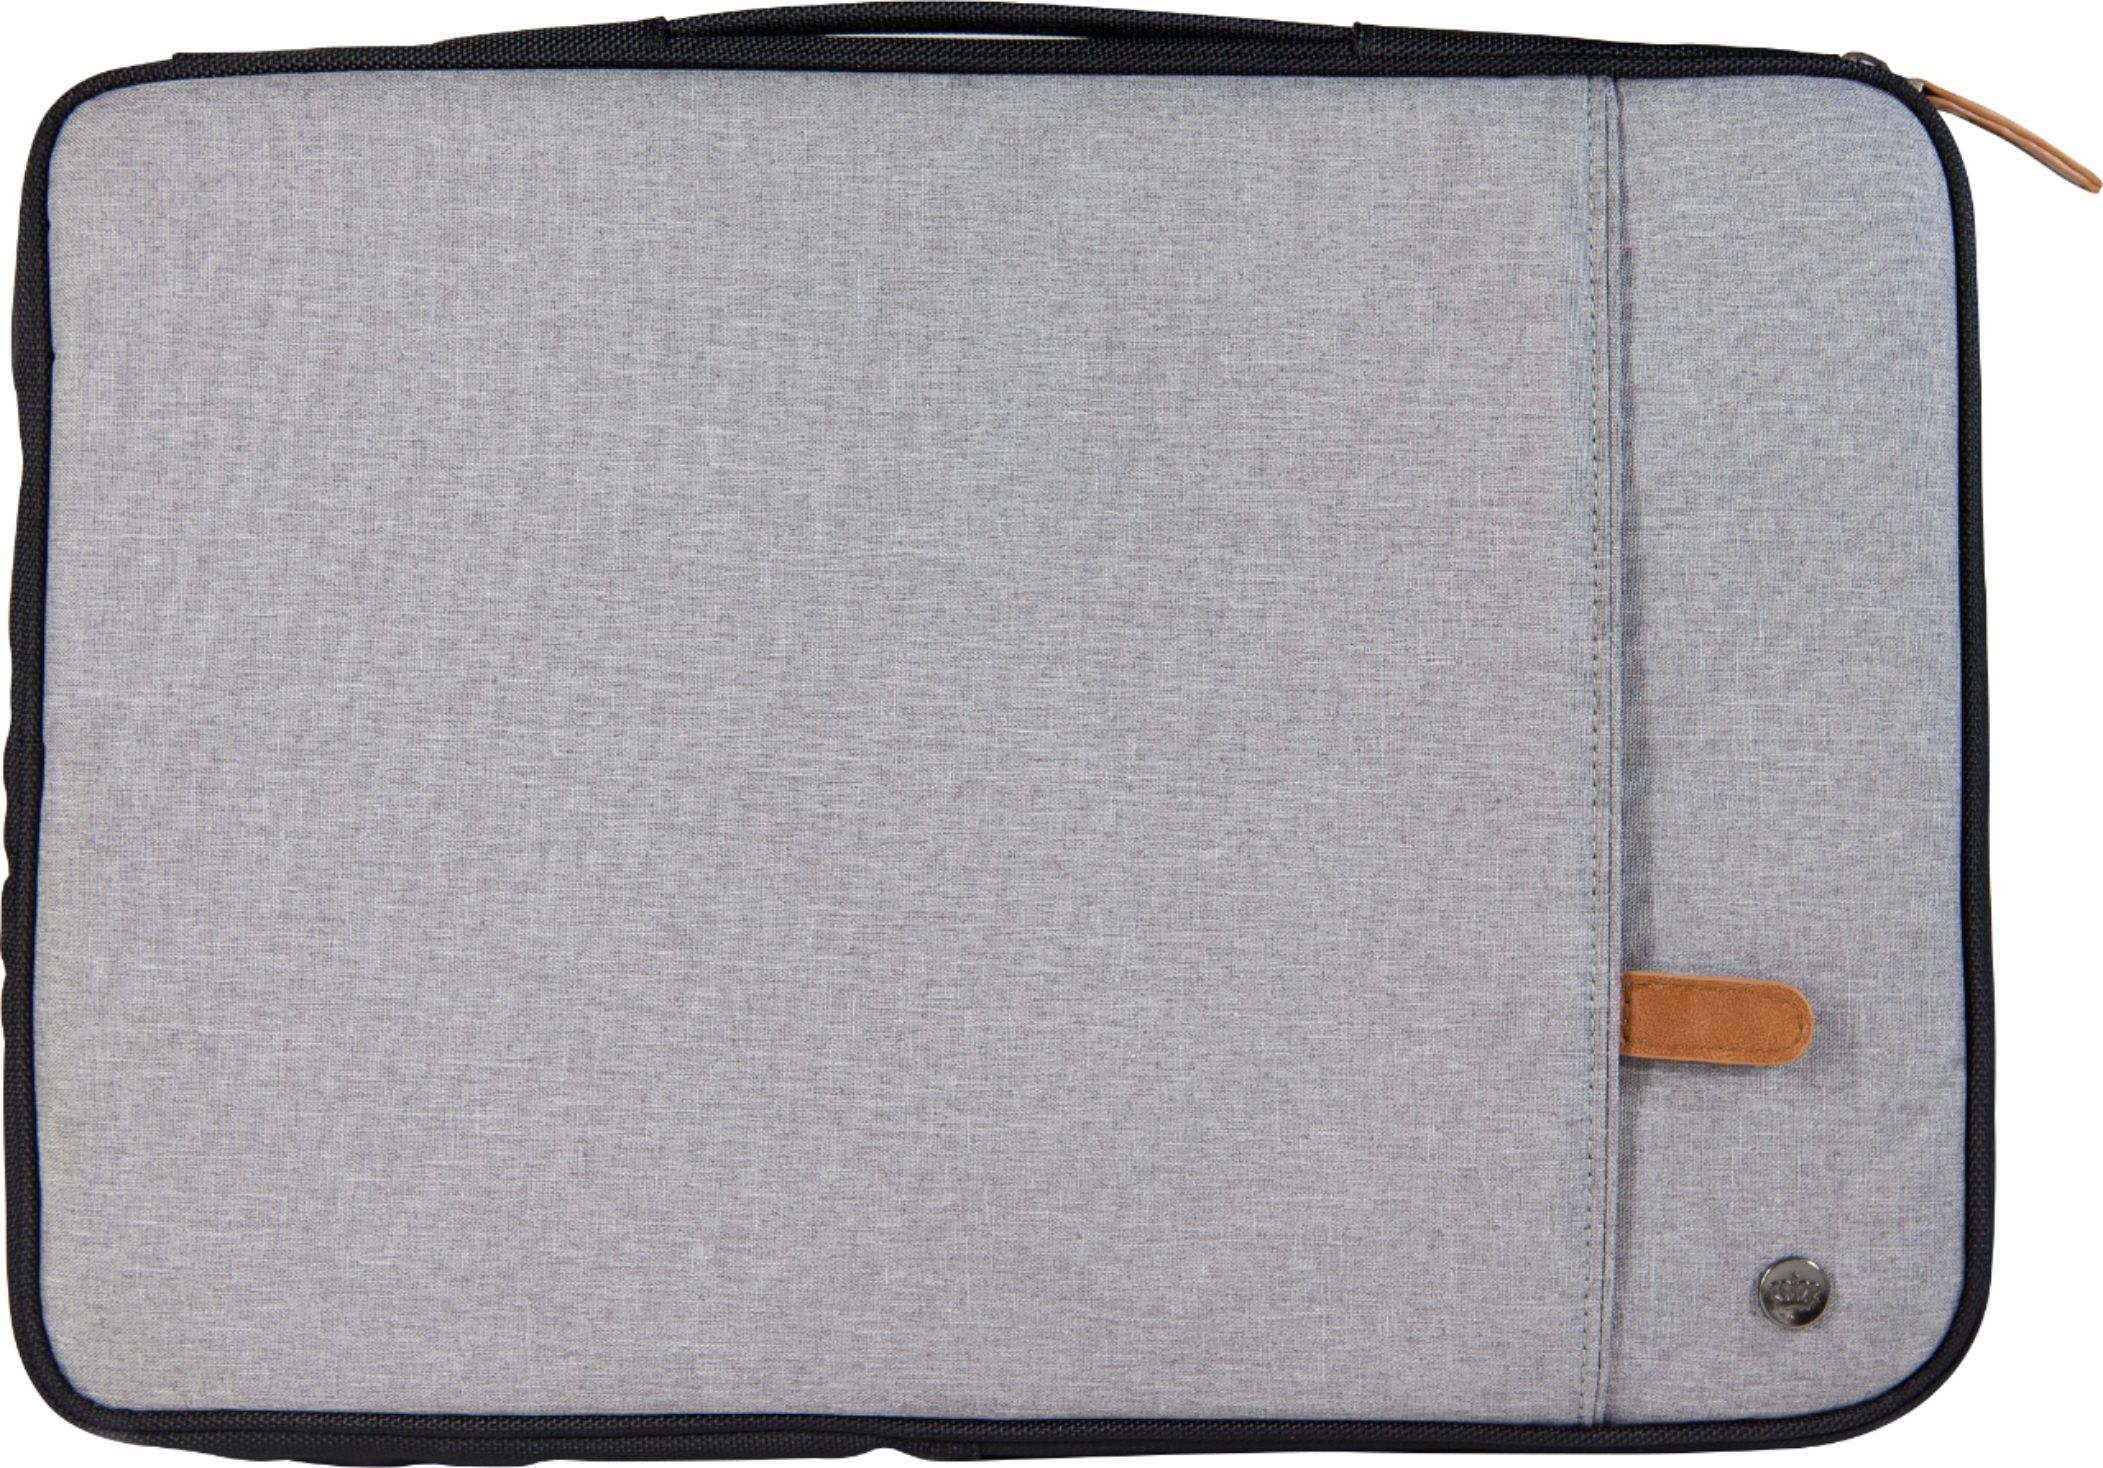 Laptop Bags & Cases: Totes and Covers for Laptops - Best Buy